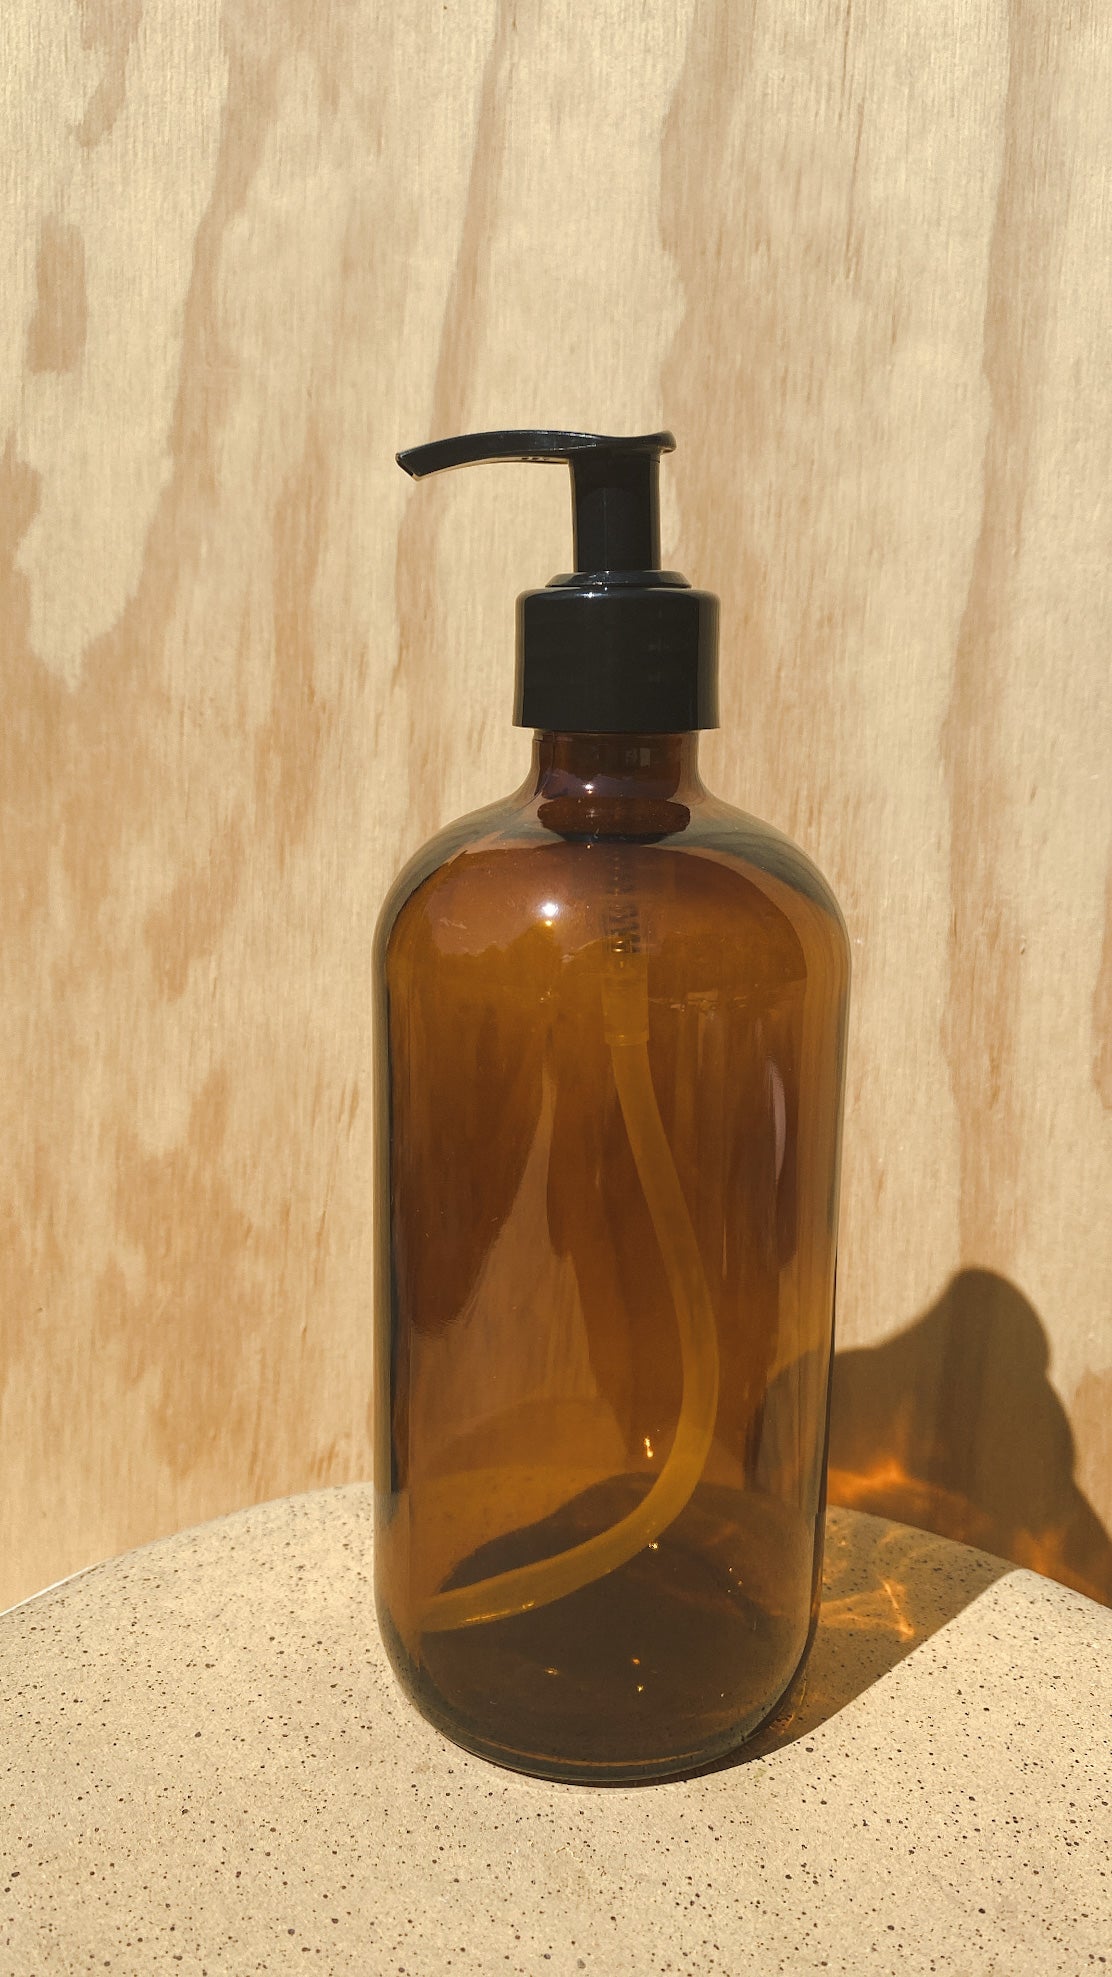 Shampoo | Unscented by Oneka